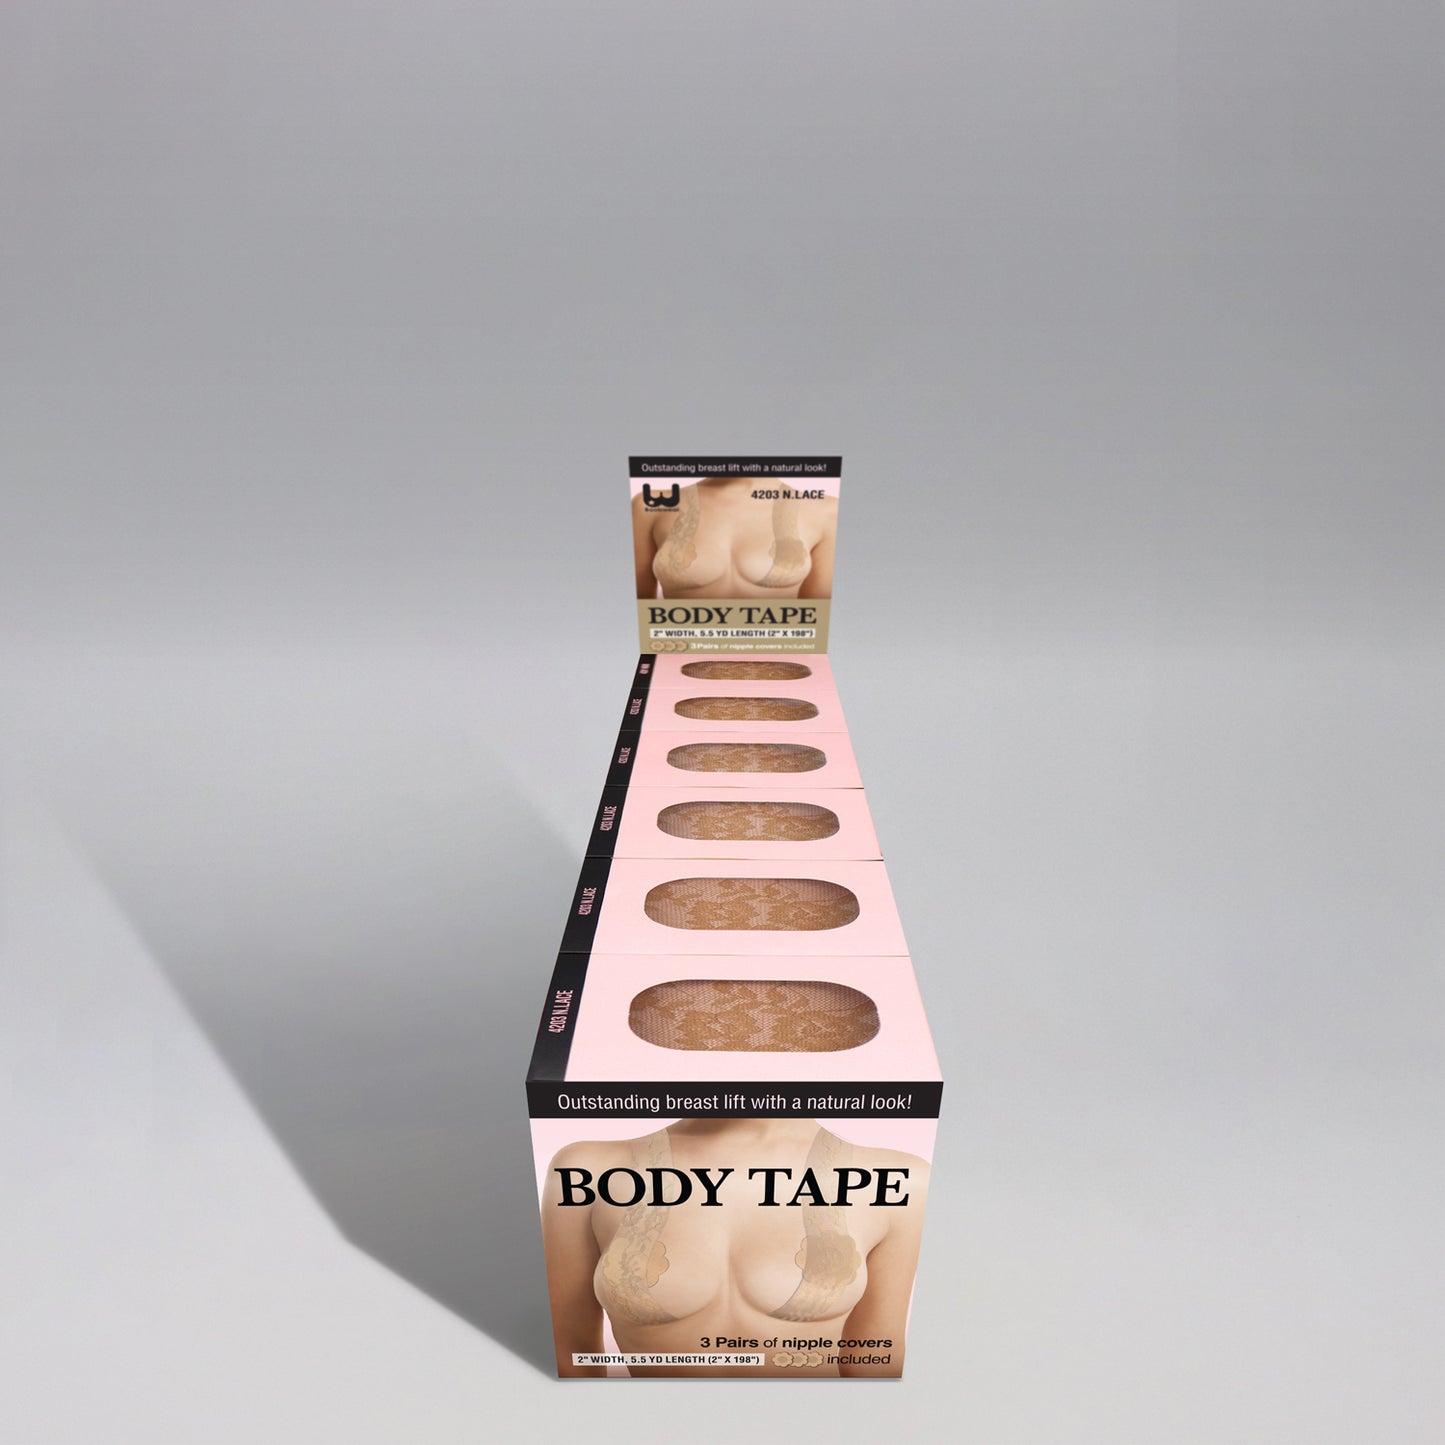 BODY TAPE by WANNABE